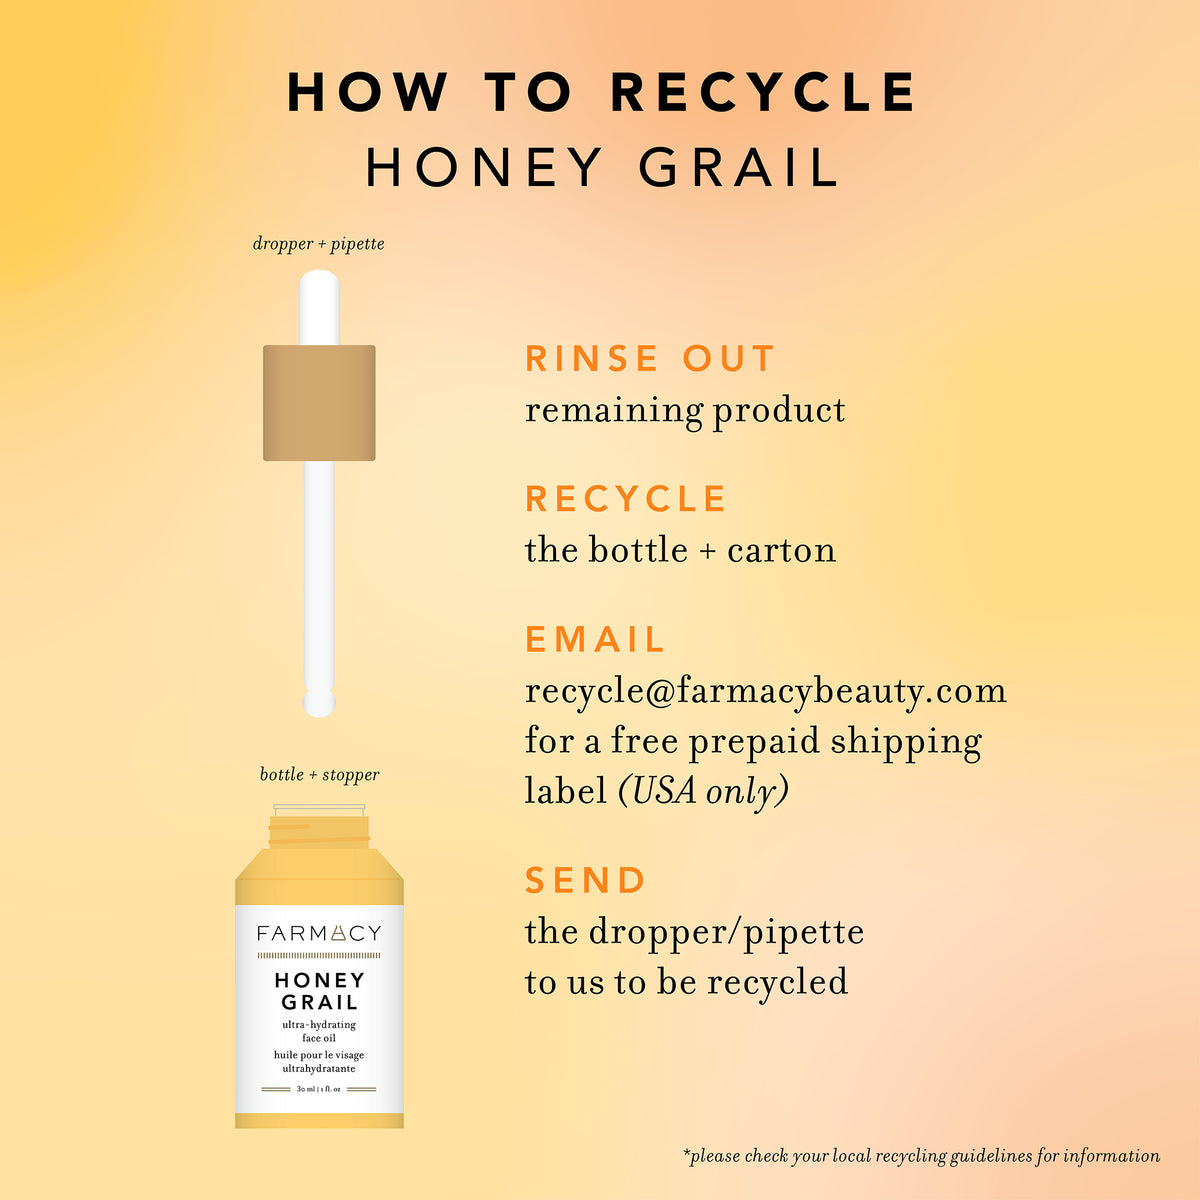 How to recycle Honey Grail